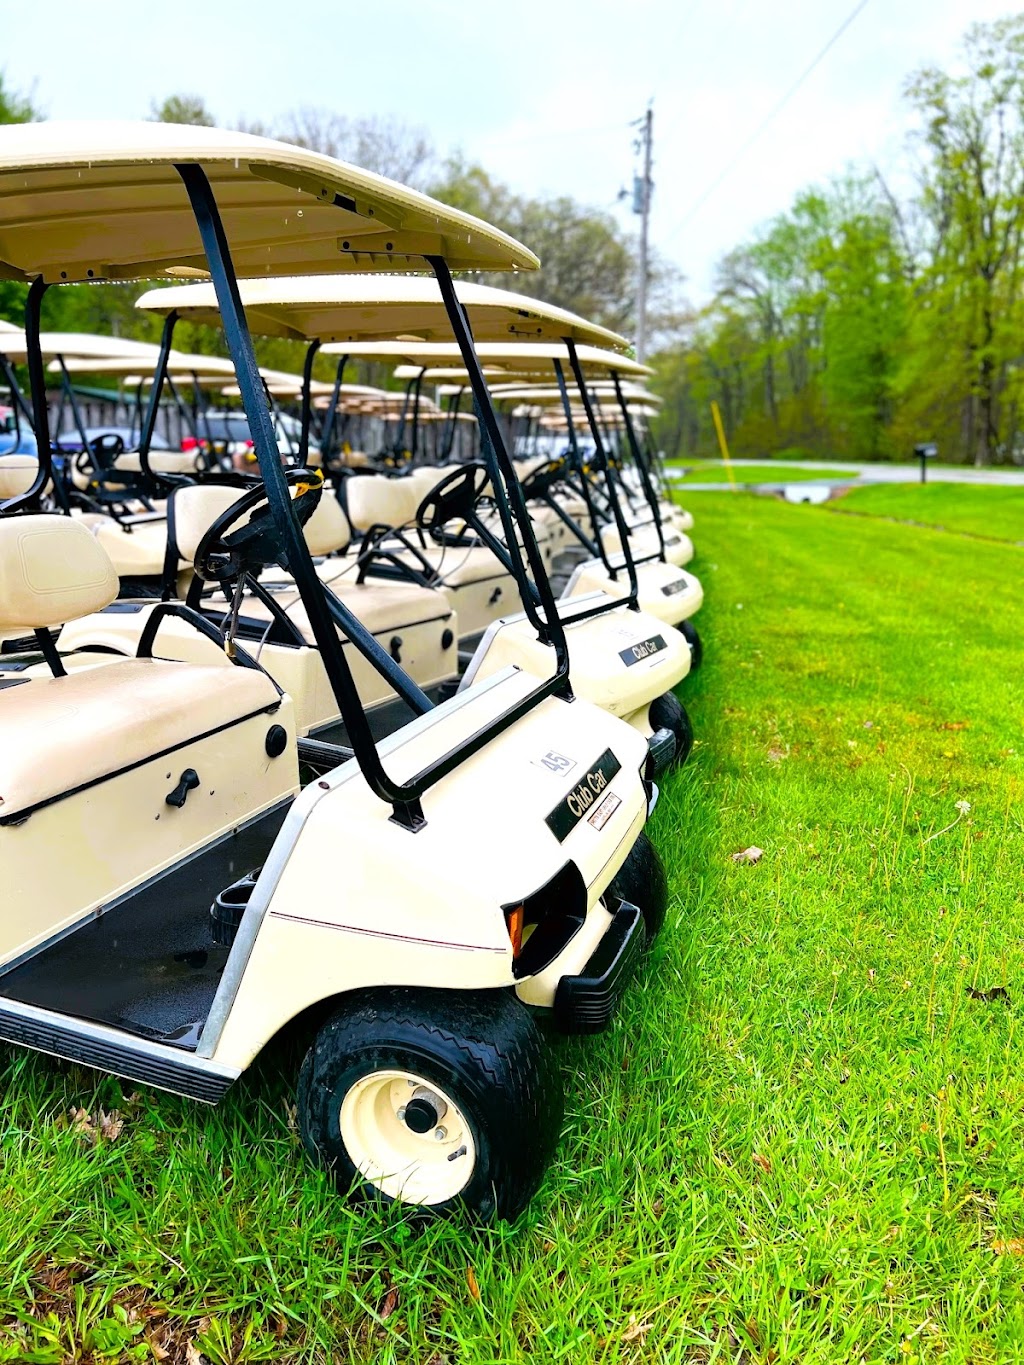 Quality Carts | 7307 IN-46, Batesville, IN 47006, USA | Phone: (812) 933-1400